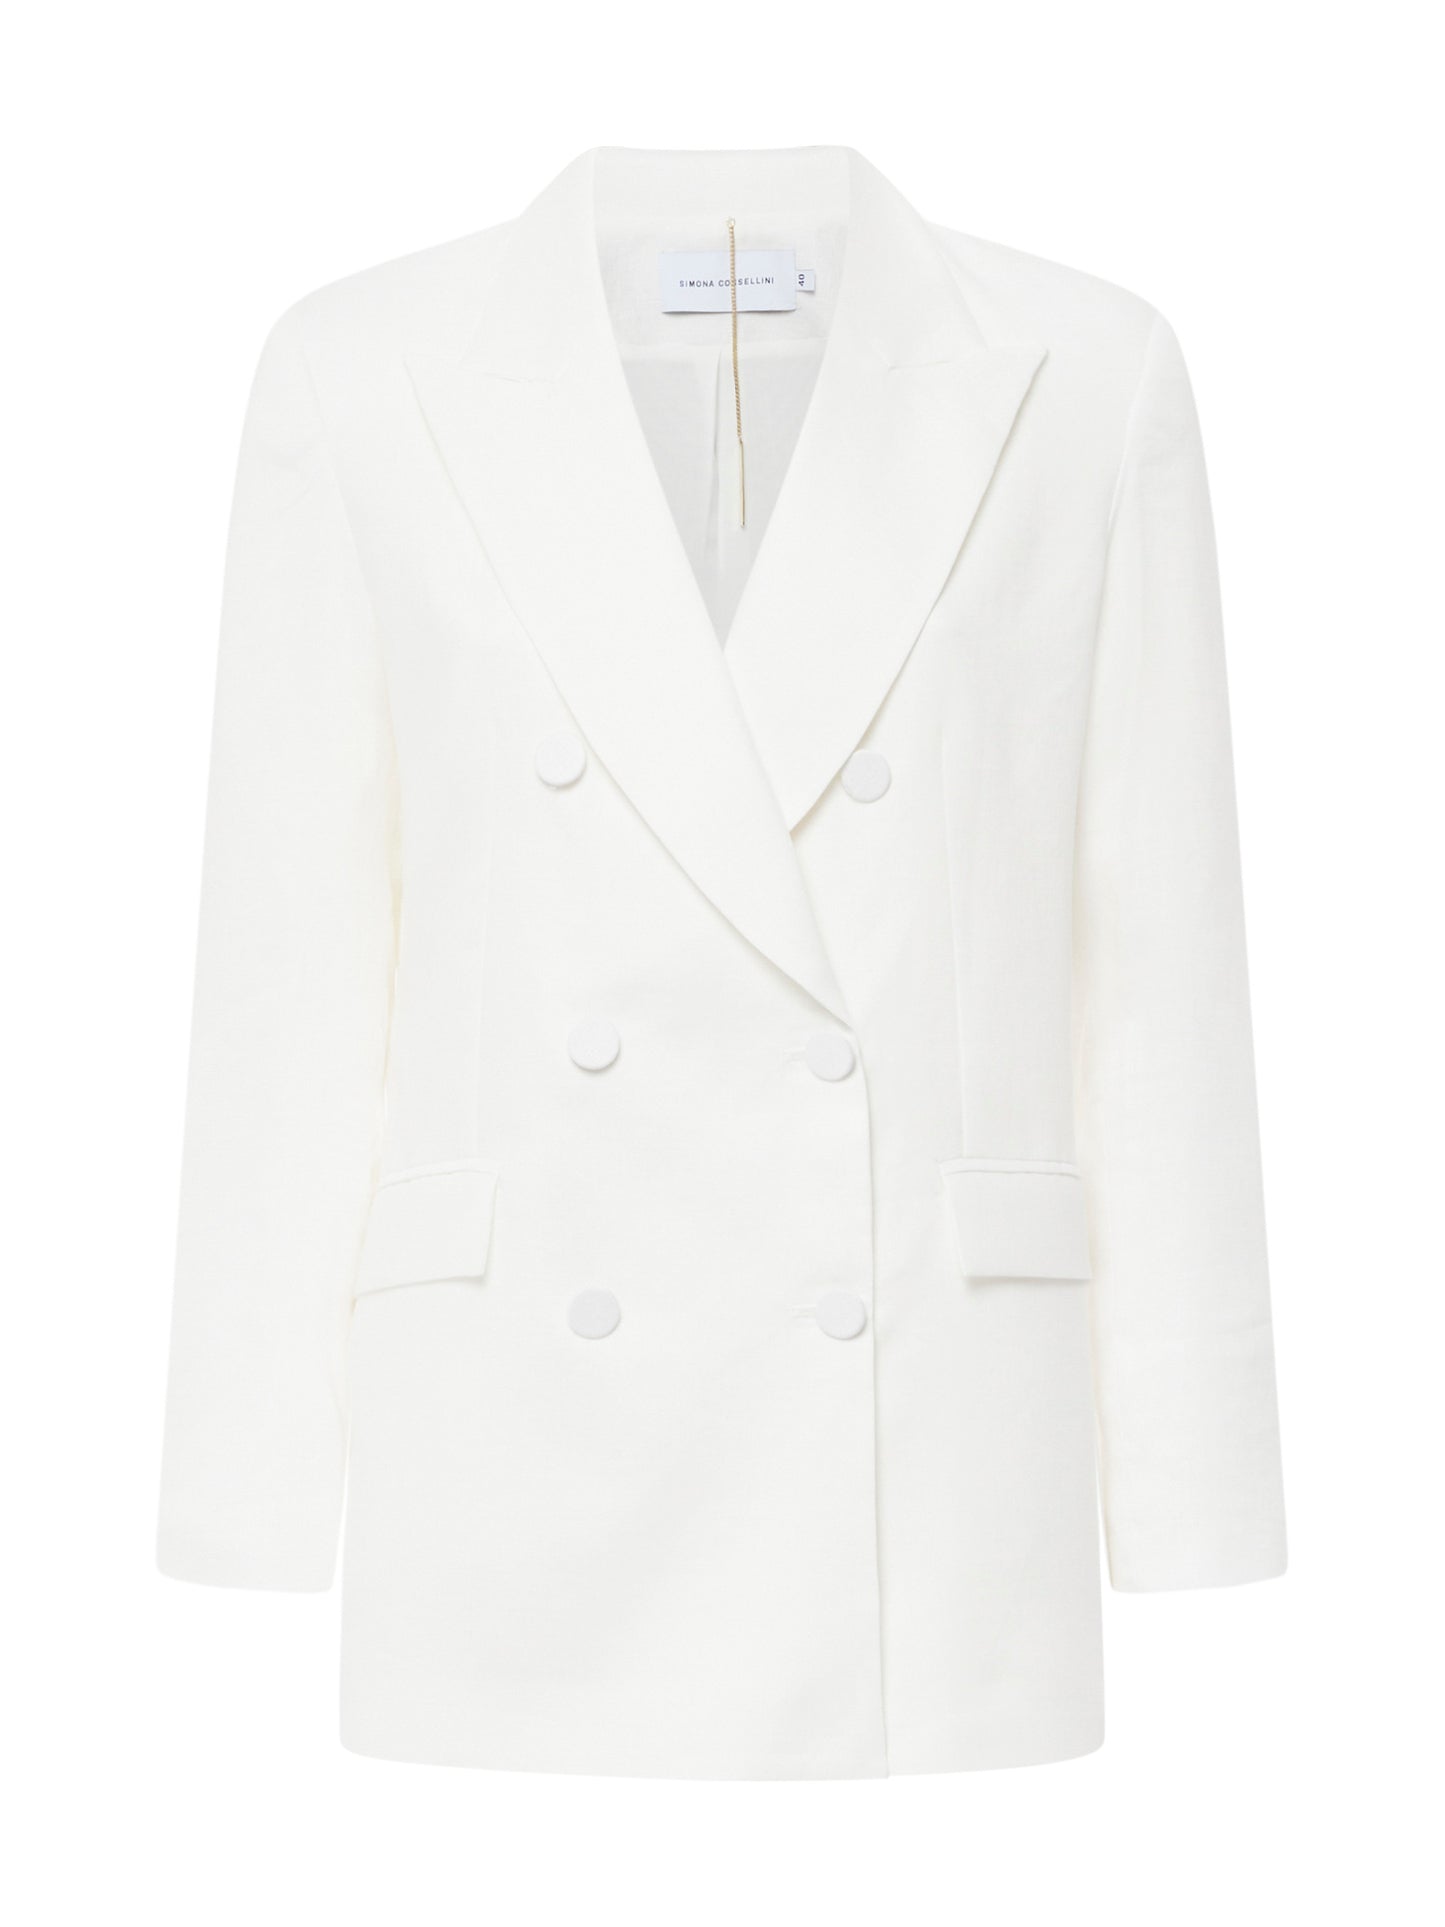 Double-breasted jacket in technical linen